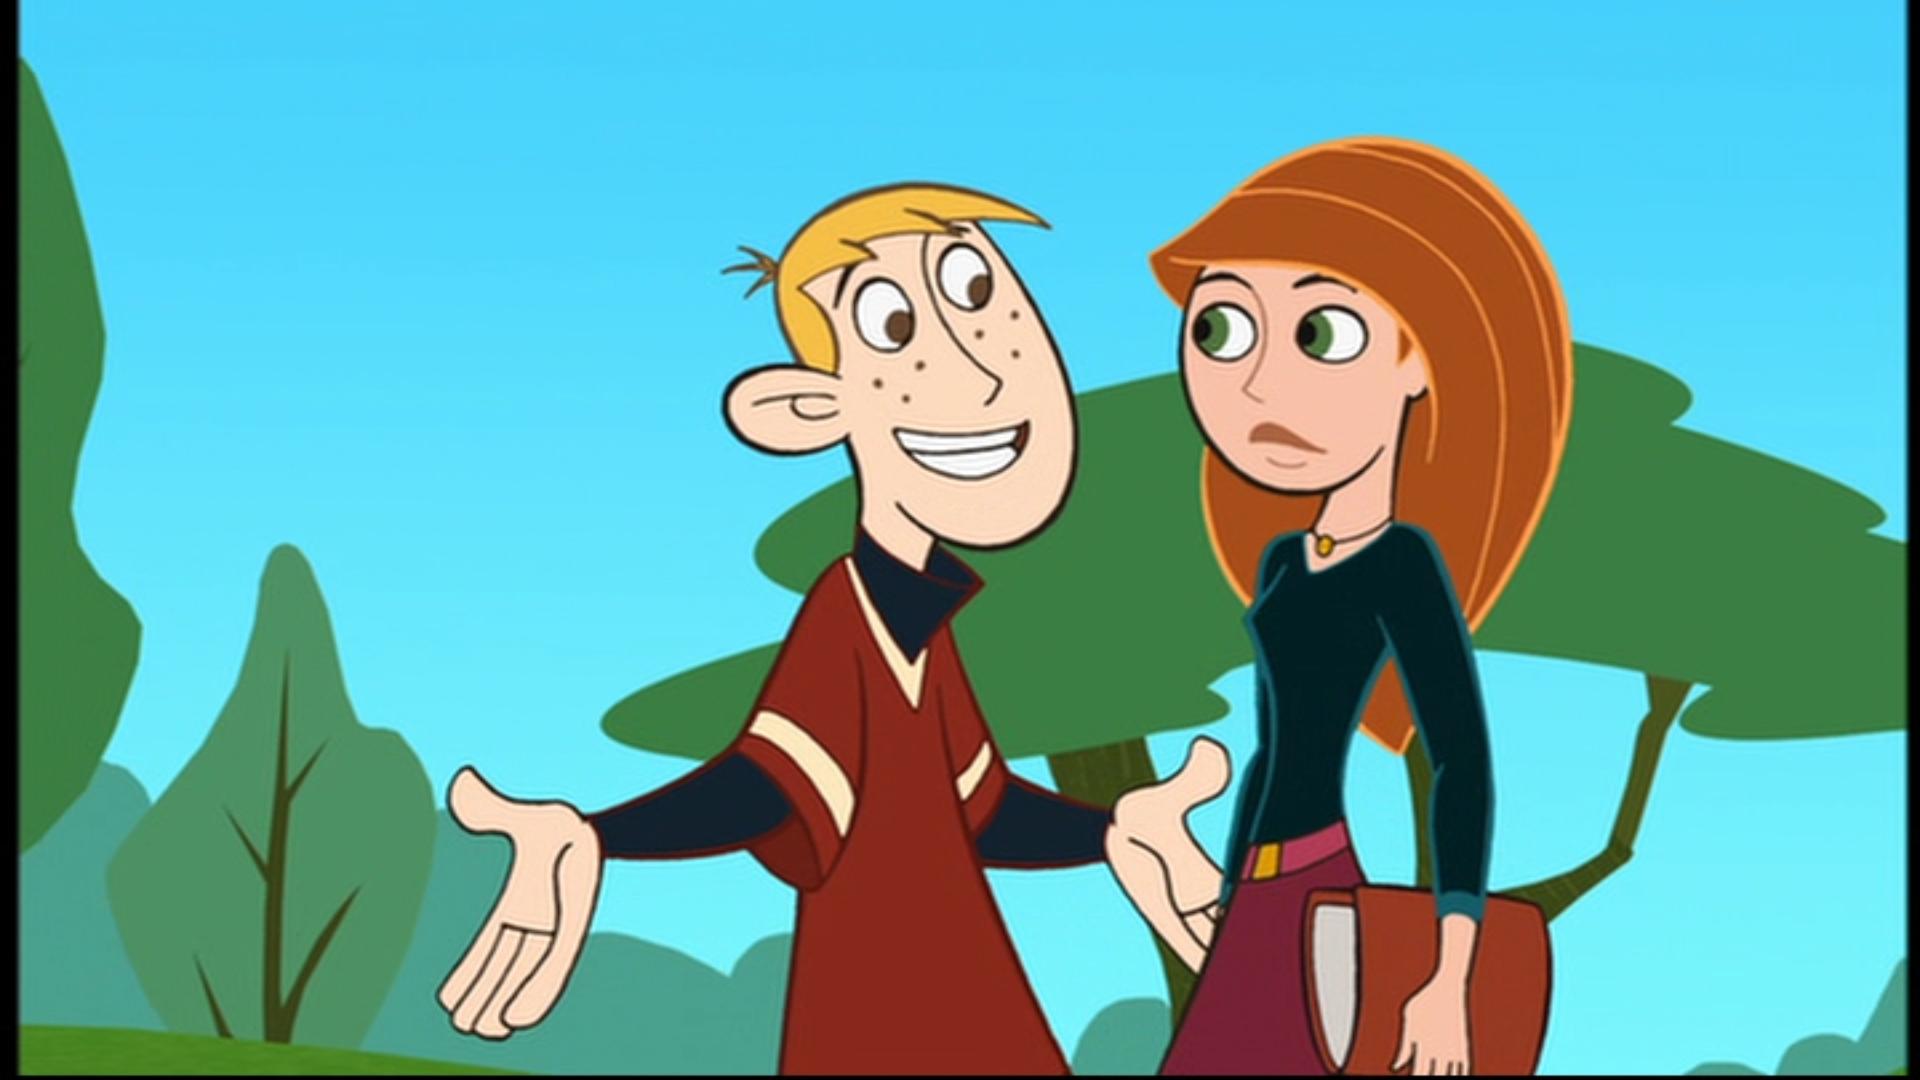 A Sitch in Time Screen Captures .:::. Kim Possible Fan World